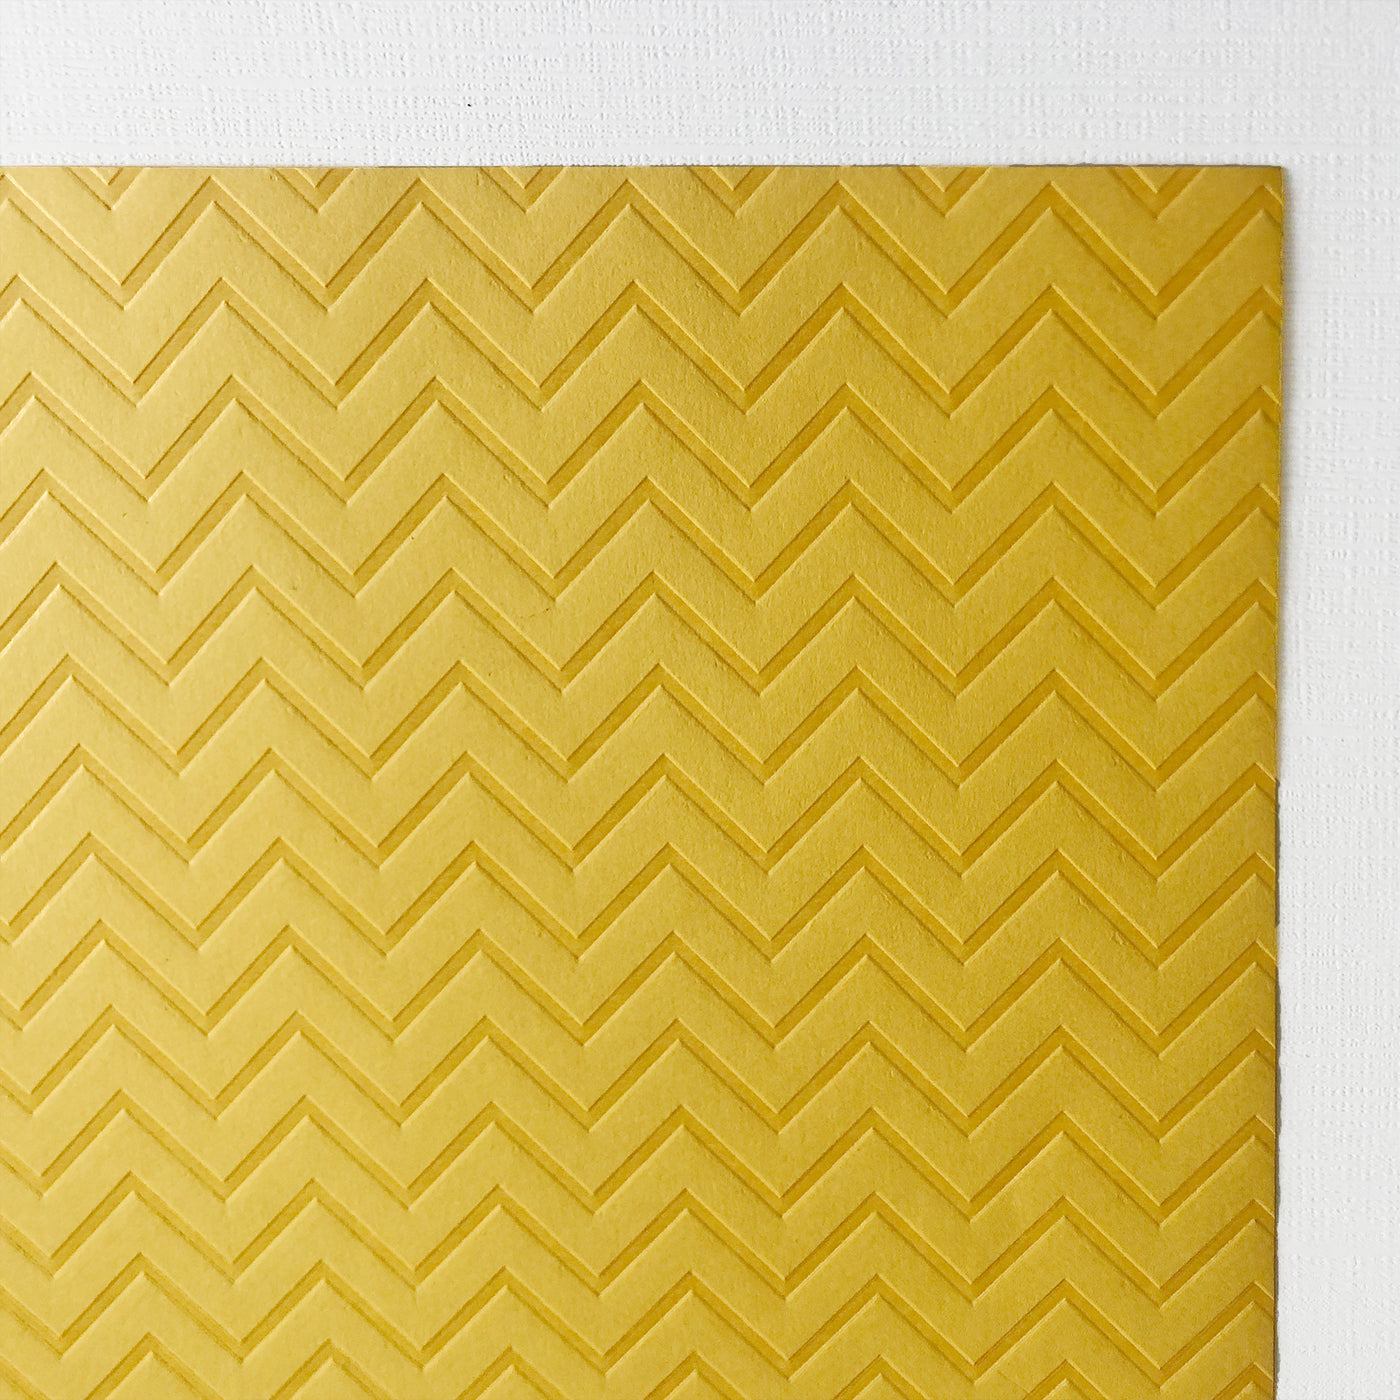 Recollections yellow embossed chevron cardstock.